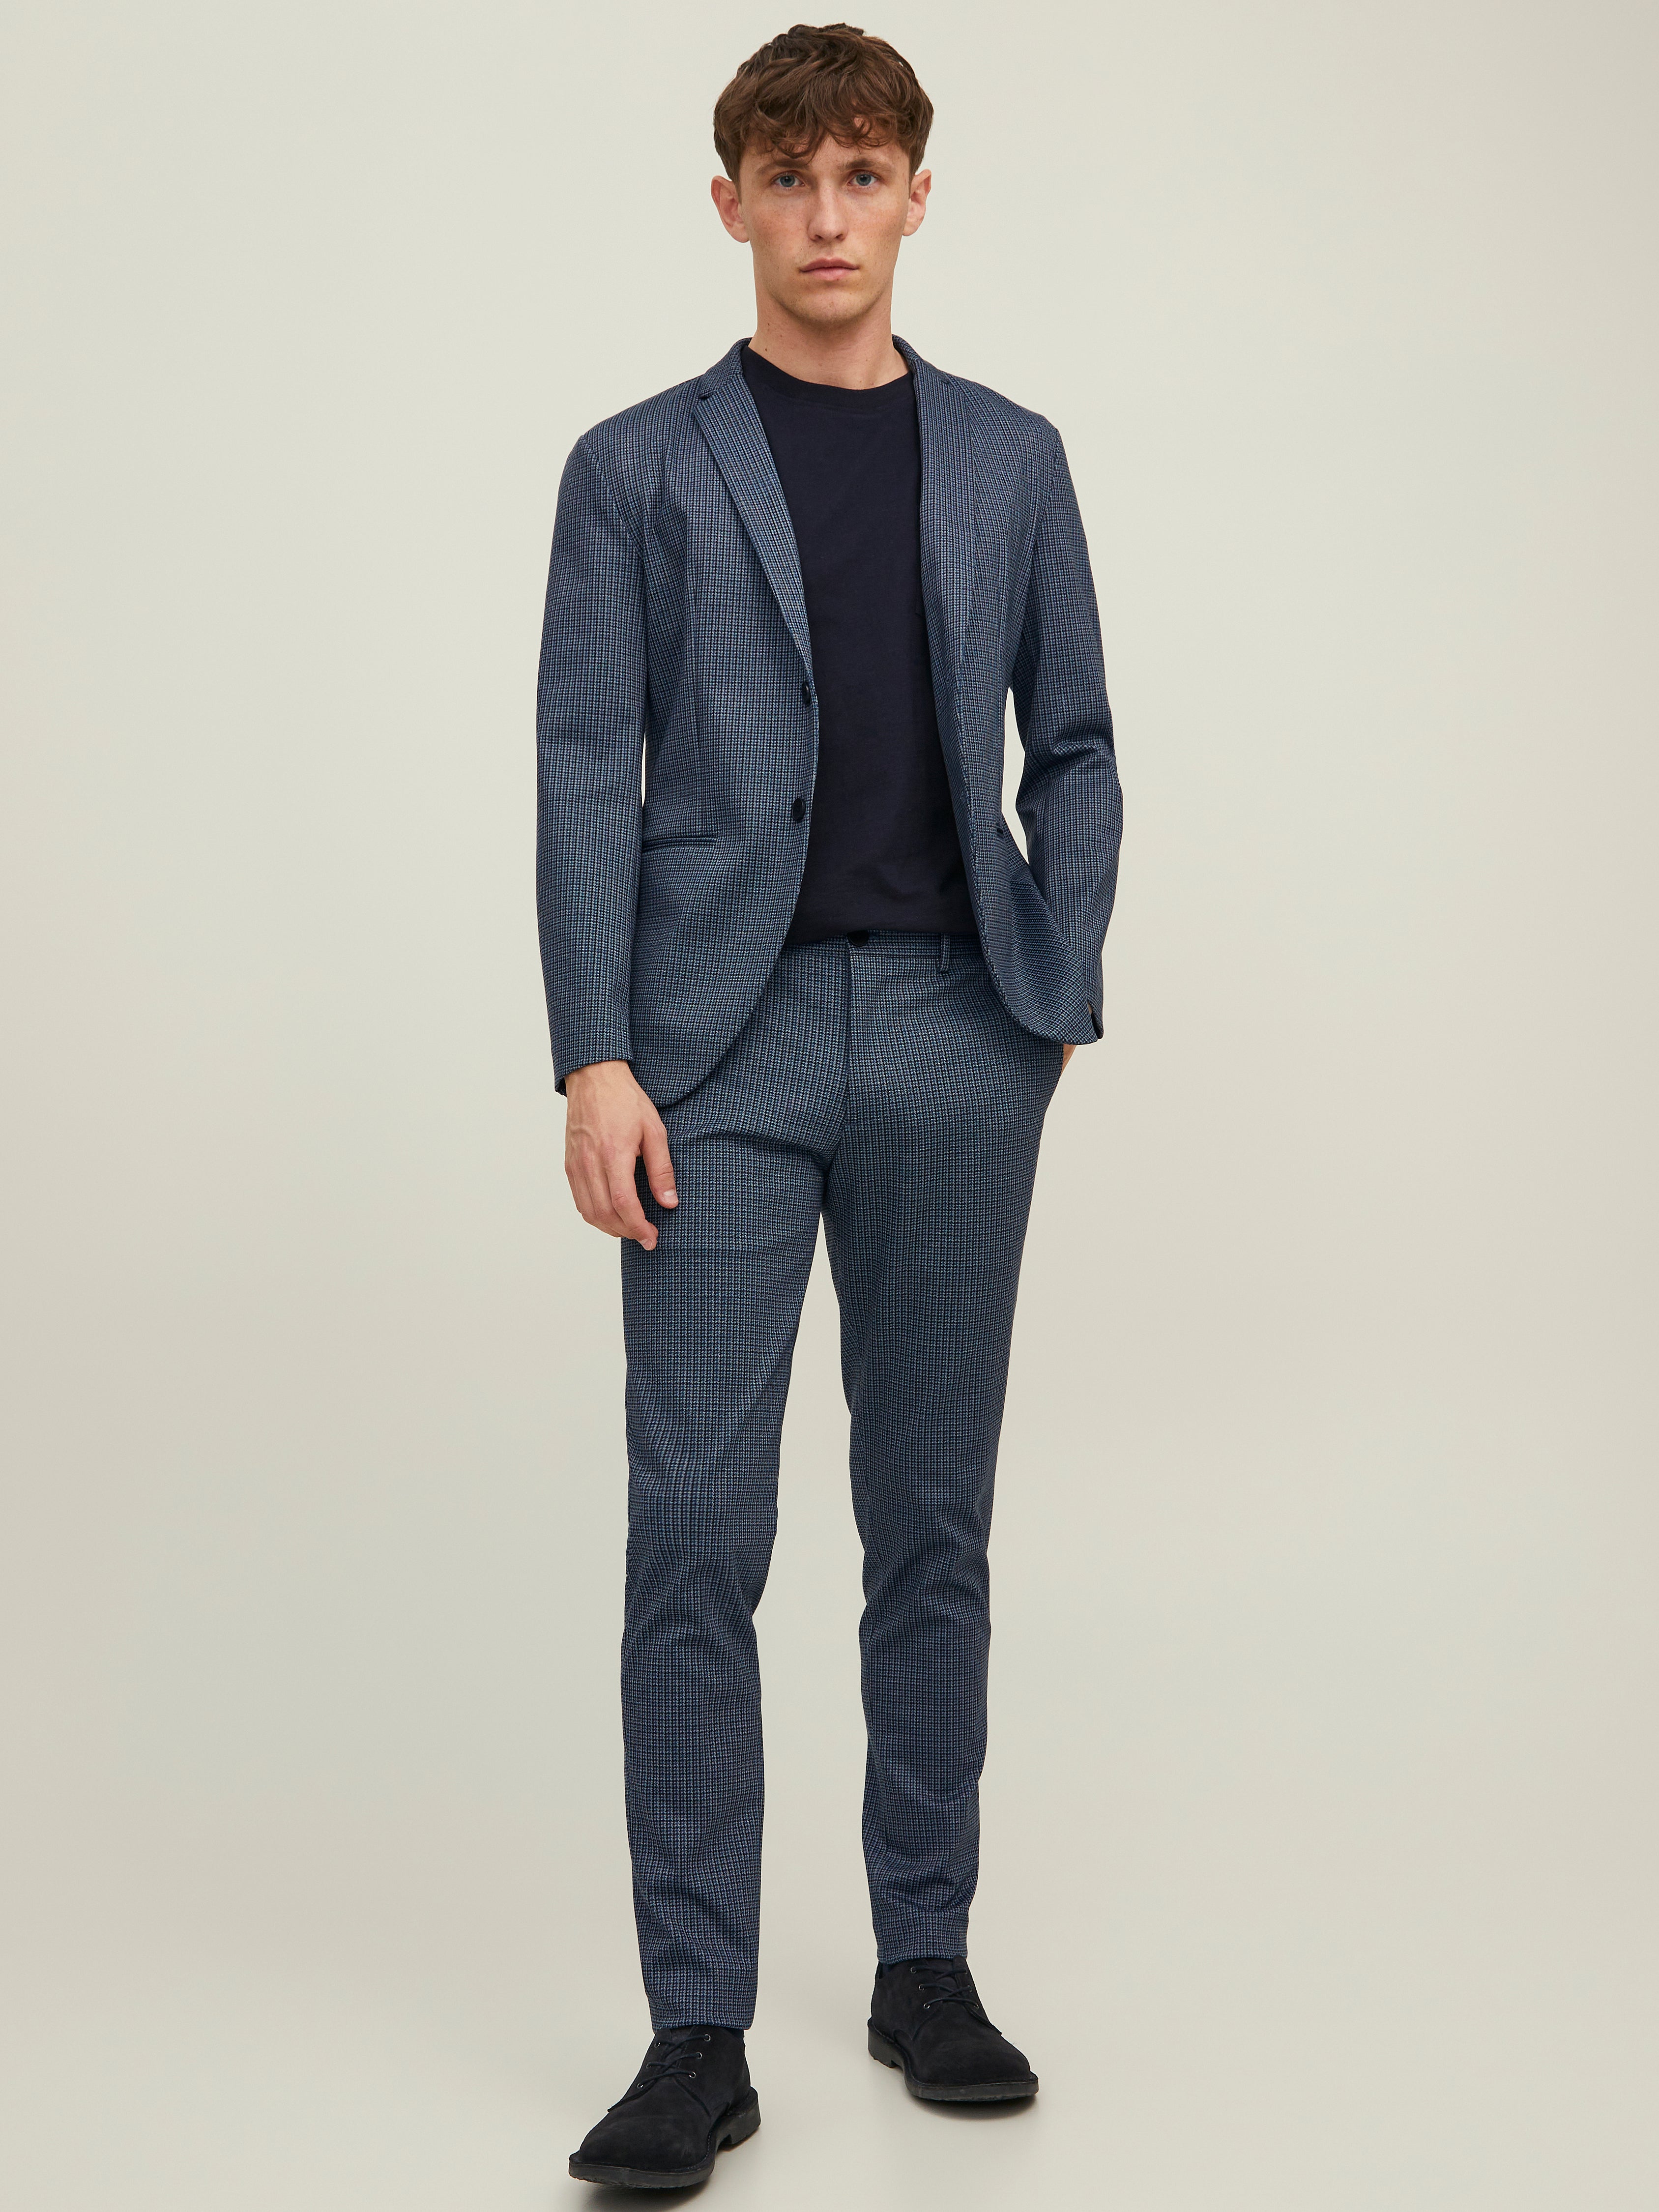 Jack & Jones Synthetic Suit in Dark Blue Mens Clothing Suits Two-piece suits Blue for Men 